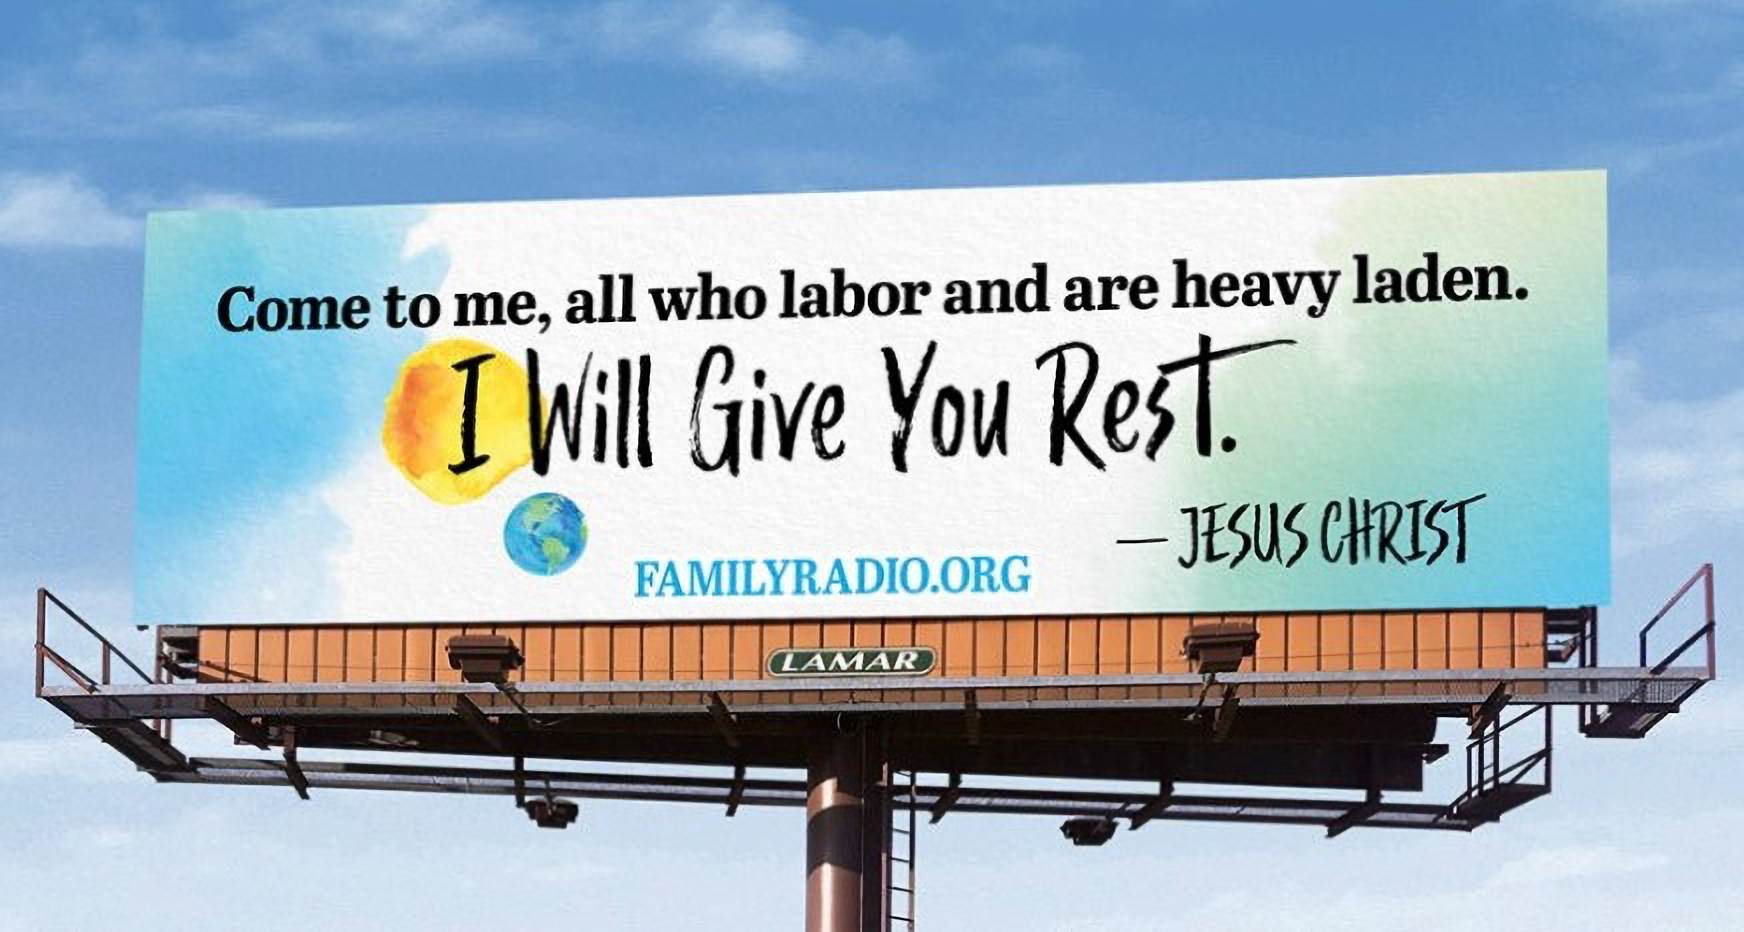 Billboard says "Come to me, all who labor and are heavy Laden. I will Give You Rest." -Jesus Christ